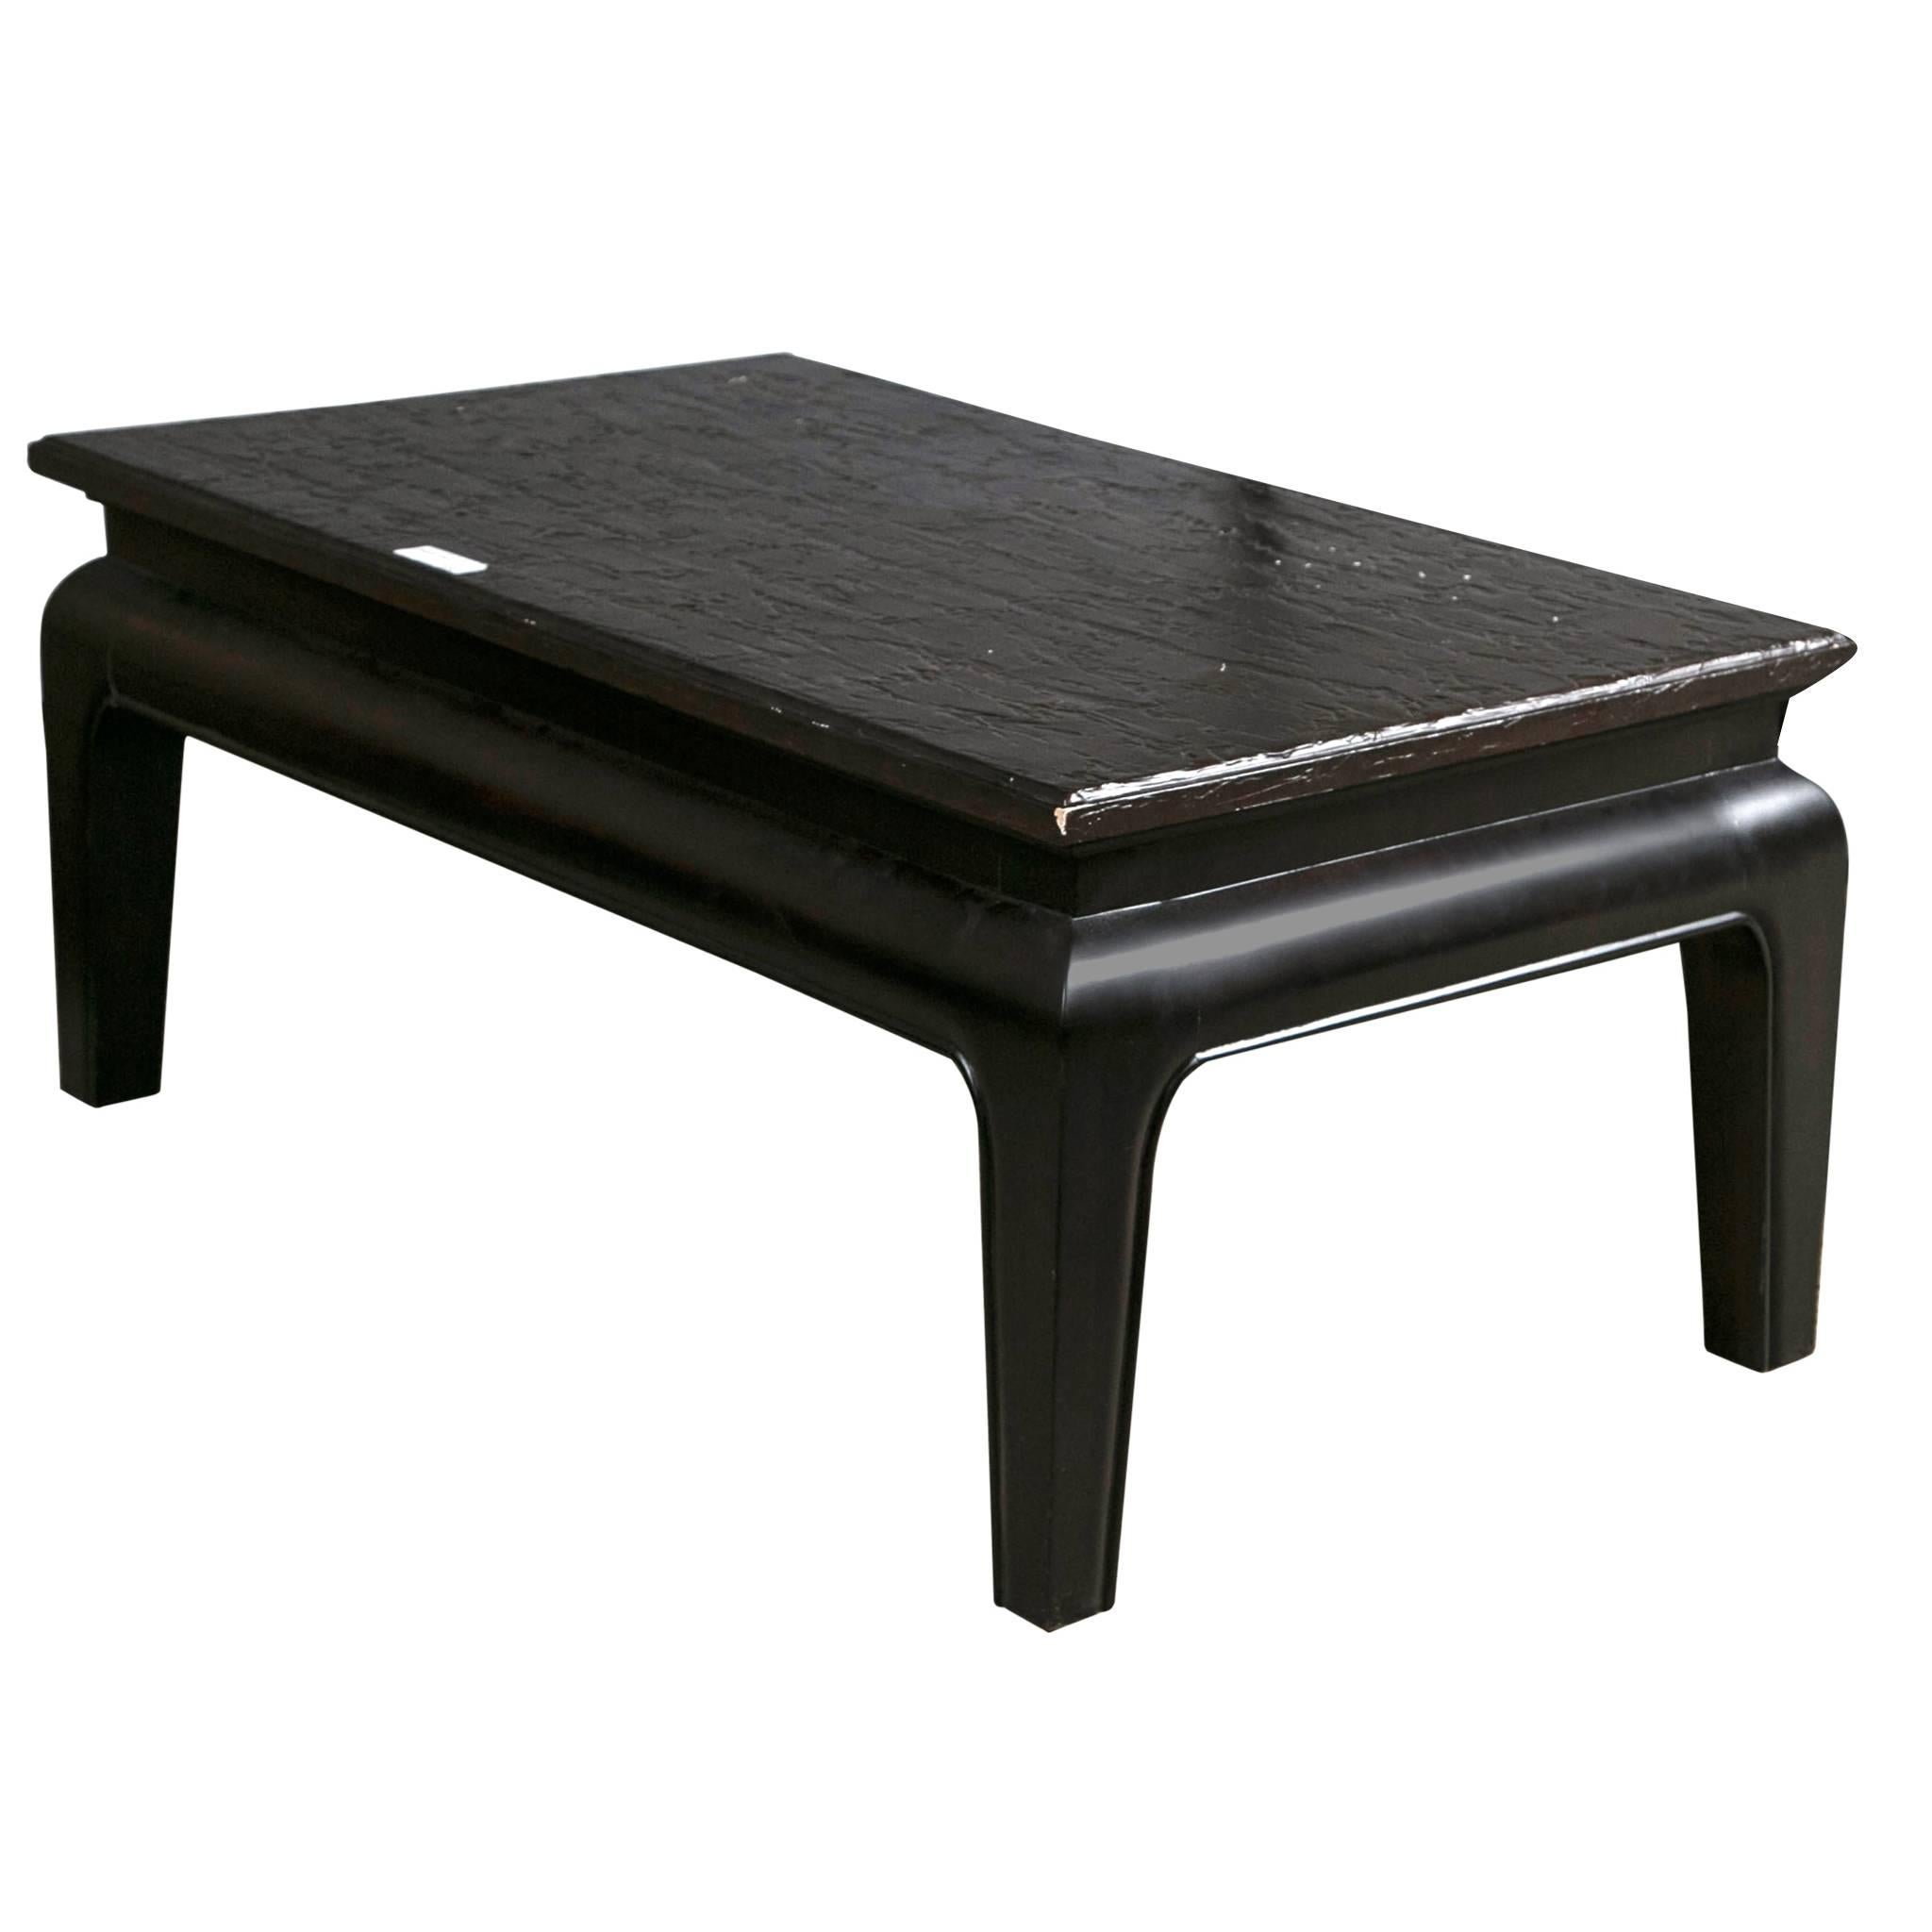  E J Victor for Jack Phillips William Beech Ebony Wood Coffee Or Cocktail Table